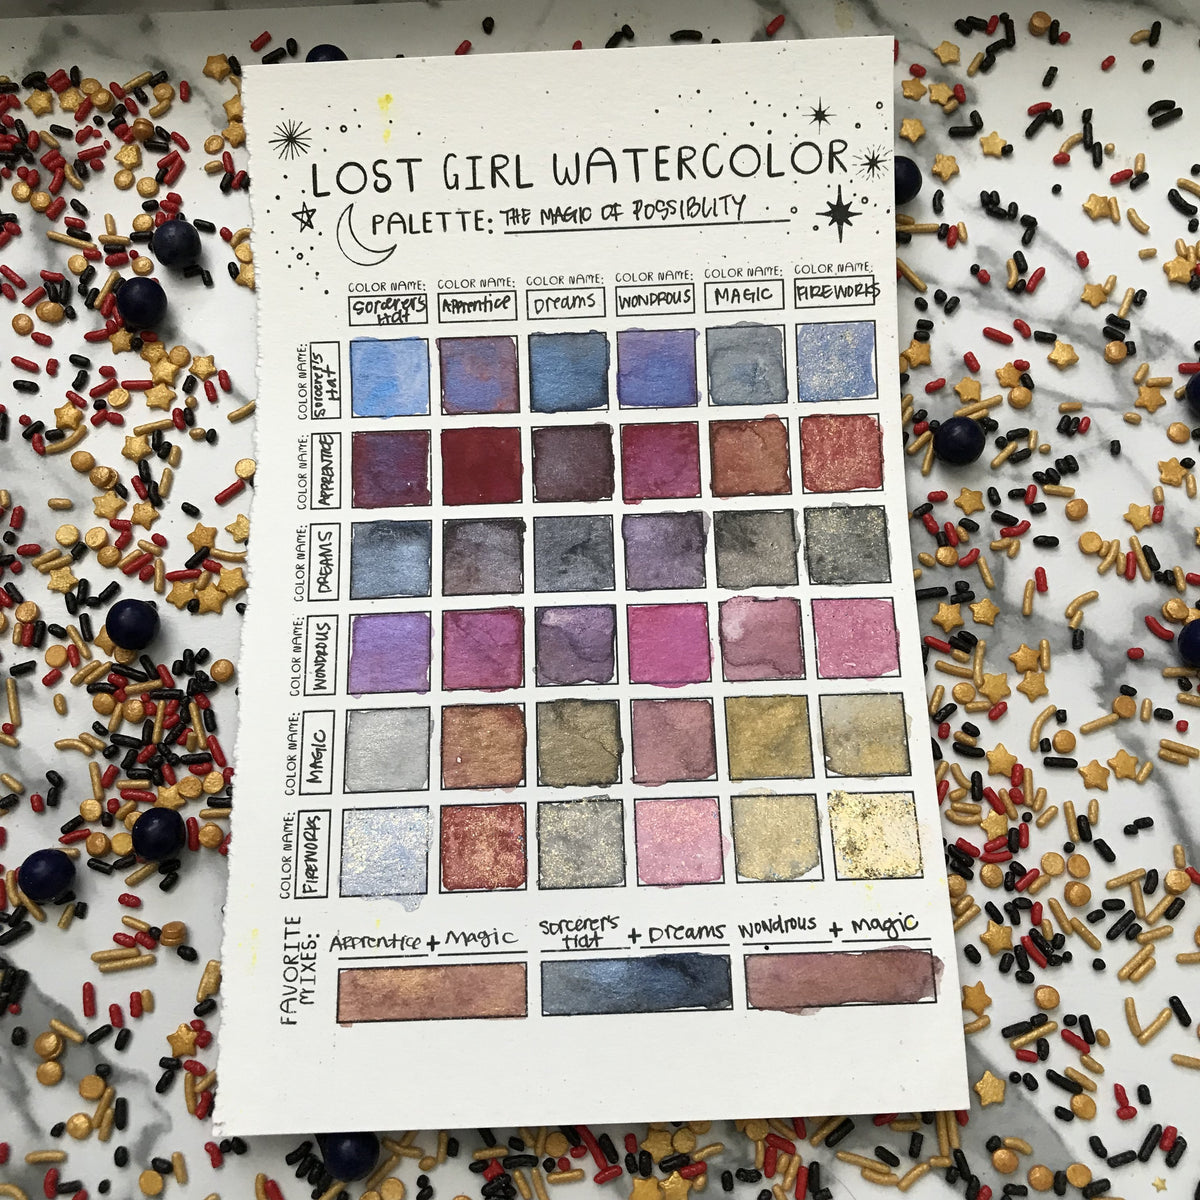 World of Fantasy and Tomorrow Handmade Watercolor Palette – Lost Girl  Watercolor